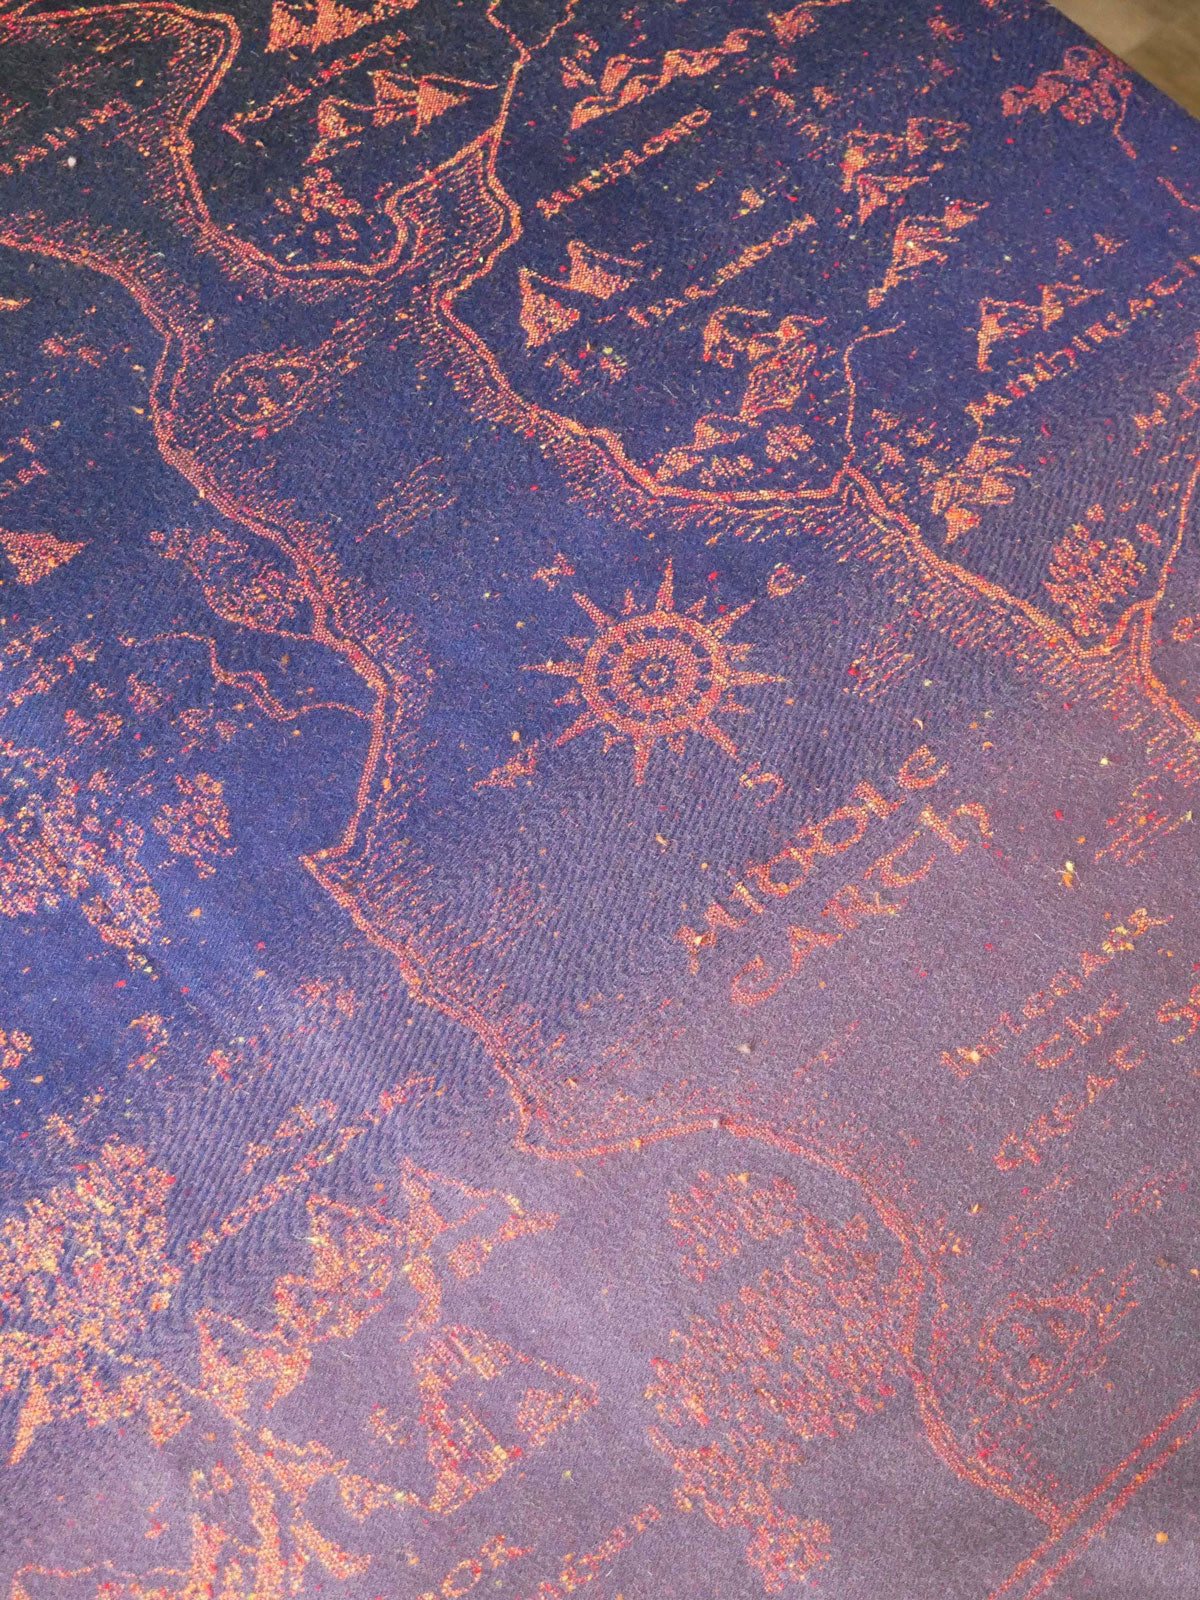 Realm of Middle-earth Odyssey Fabric Pieces